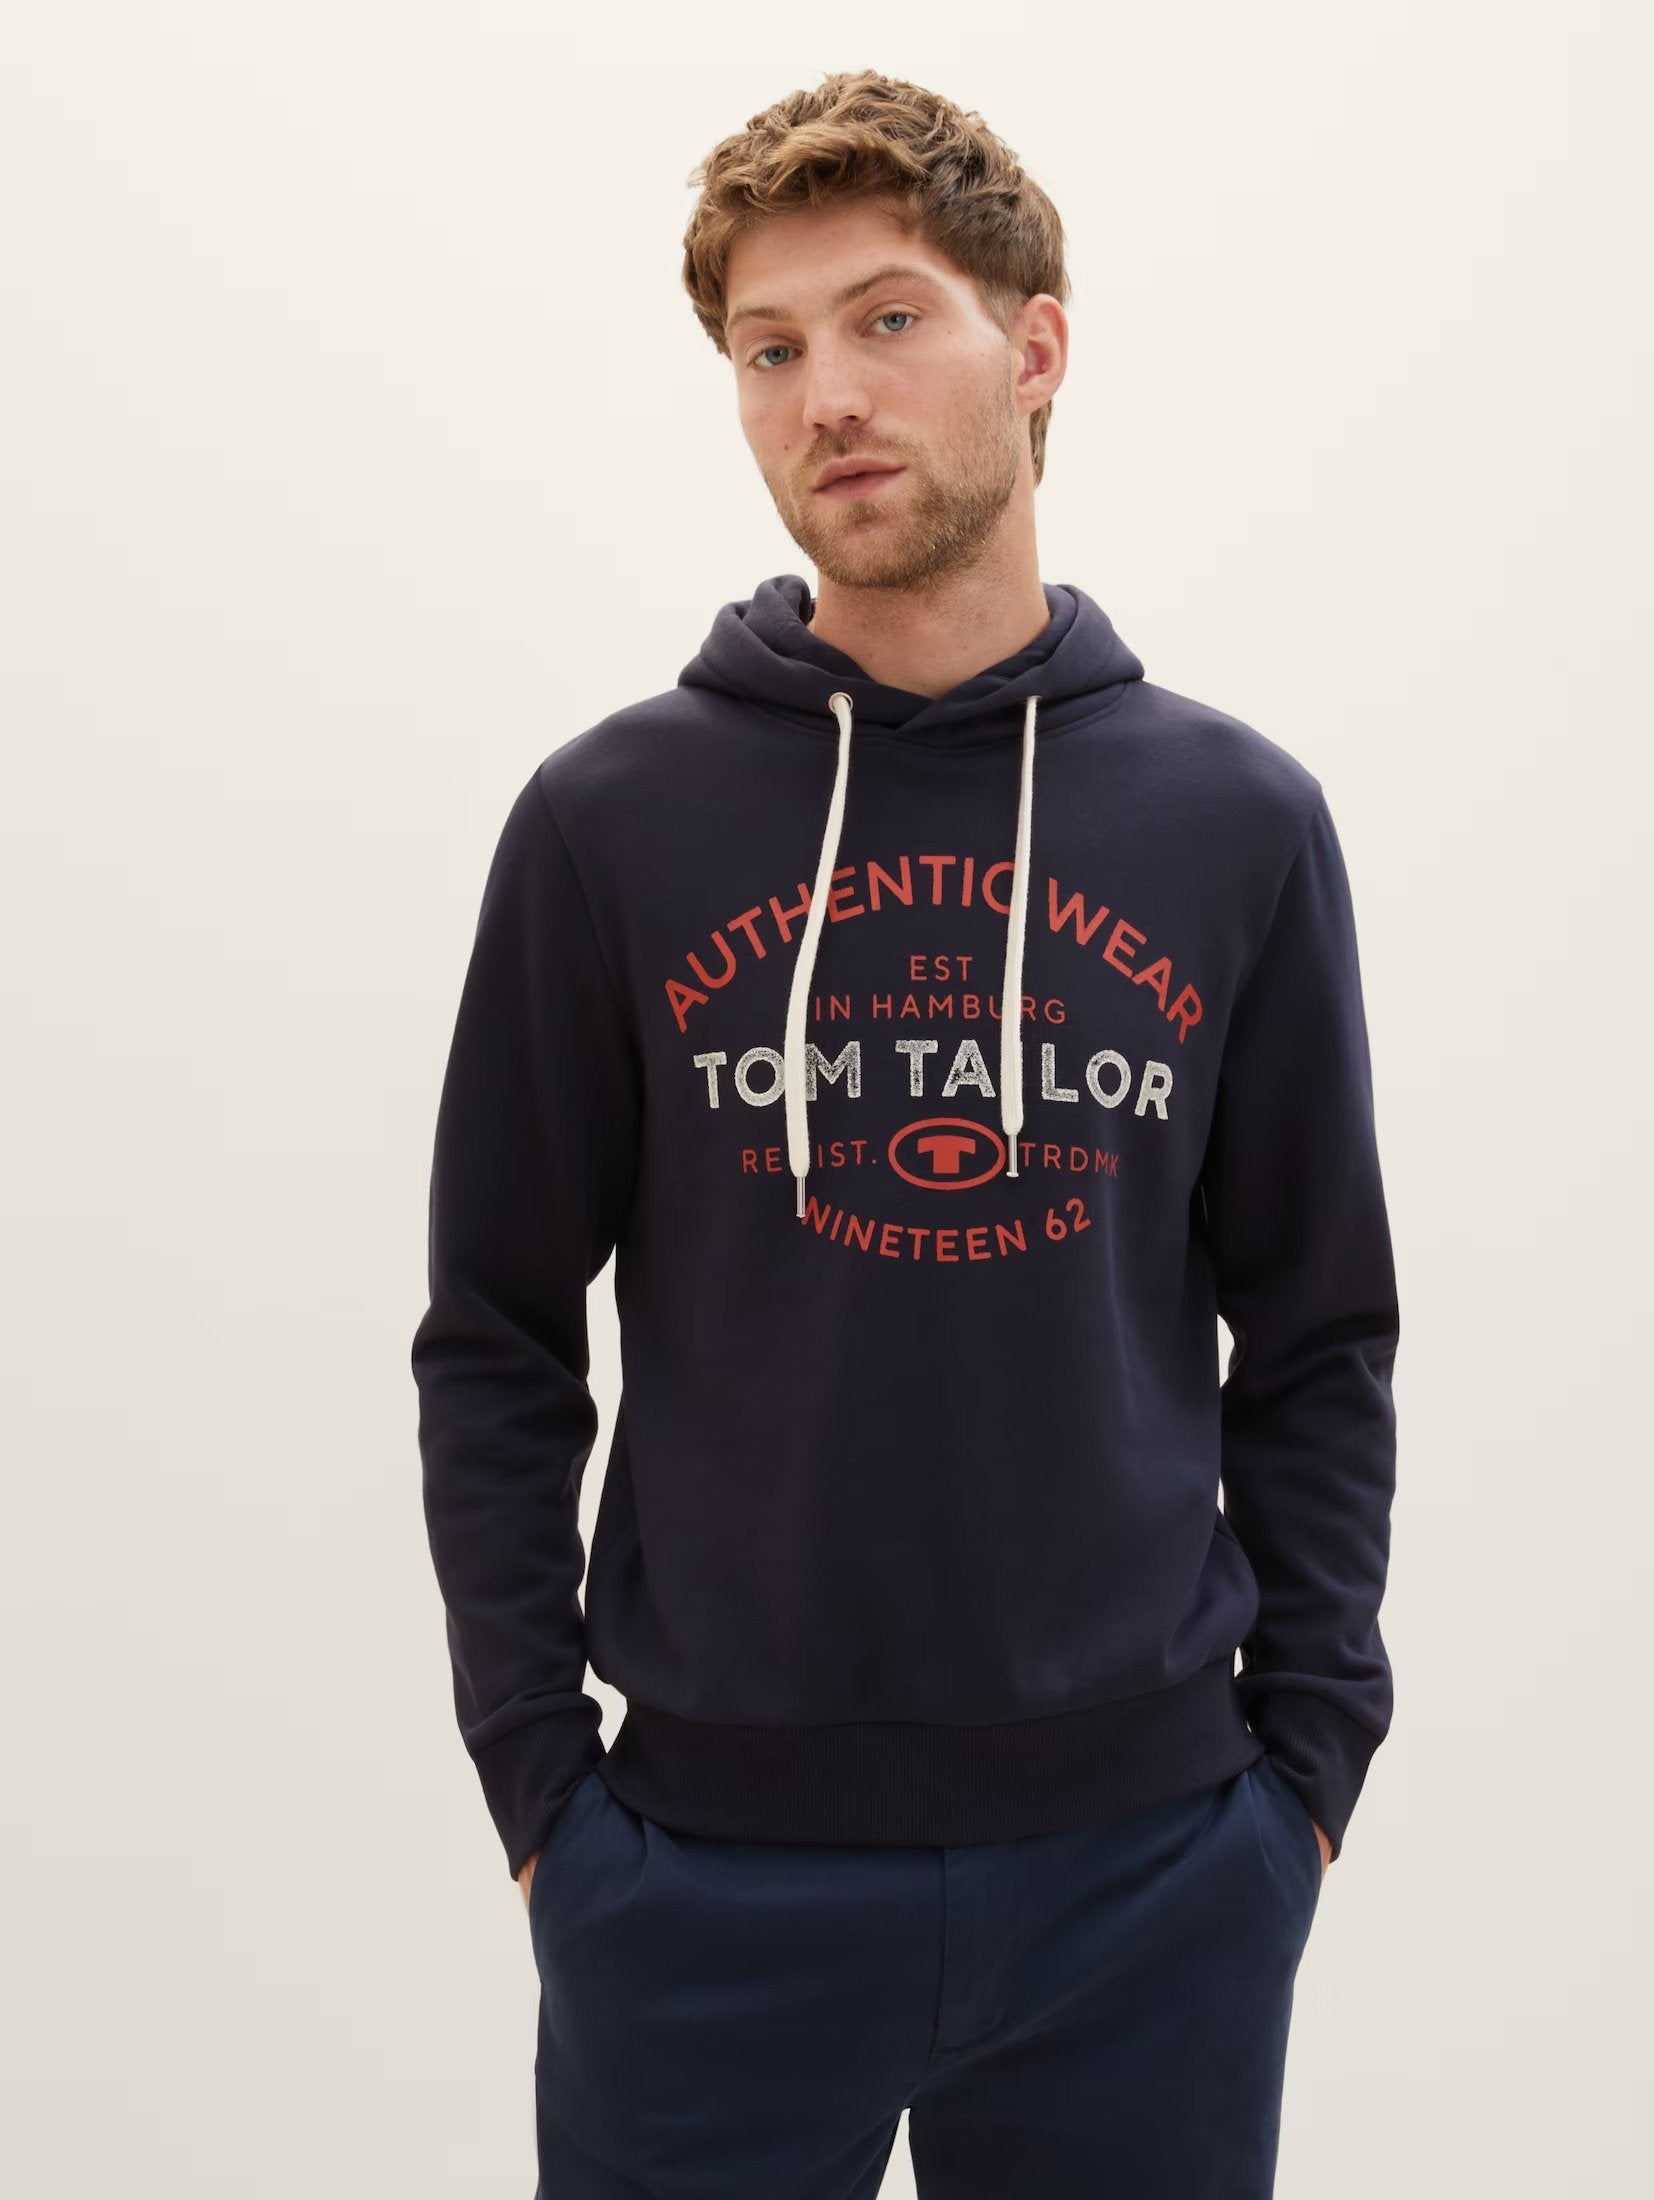 Tom Tailor "Authentic Wear" Designed Navy Hoodie